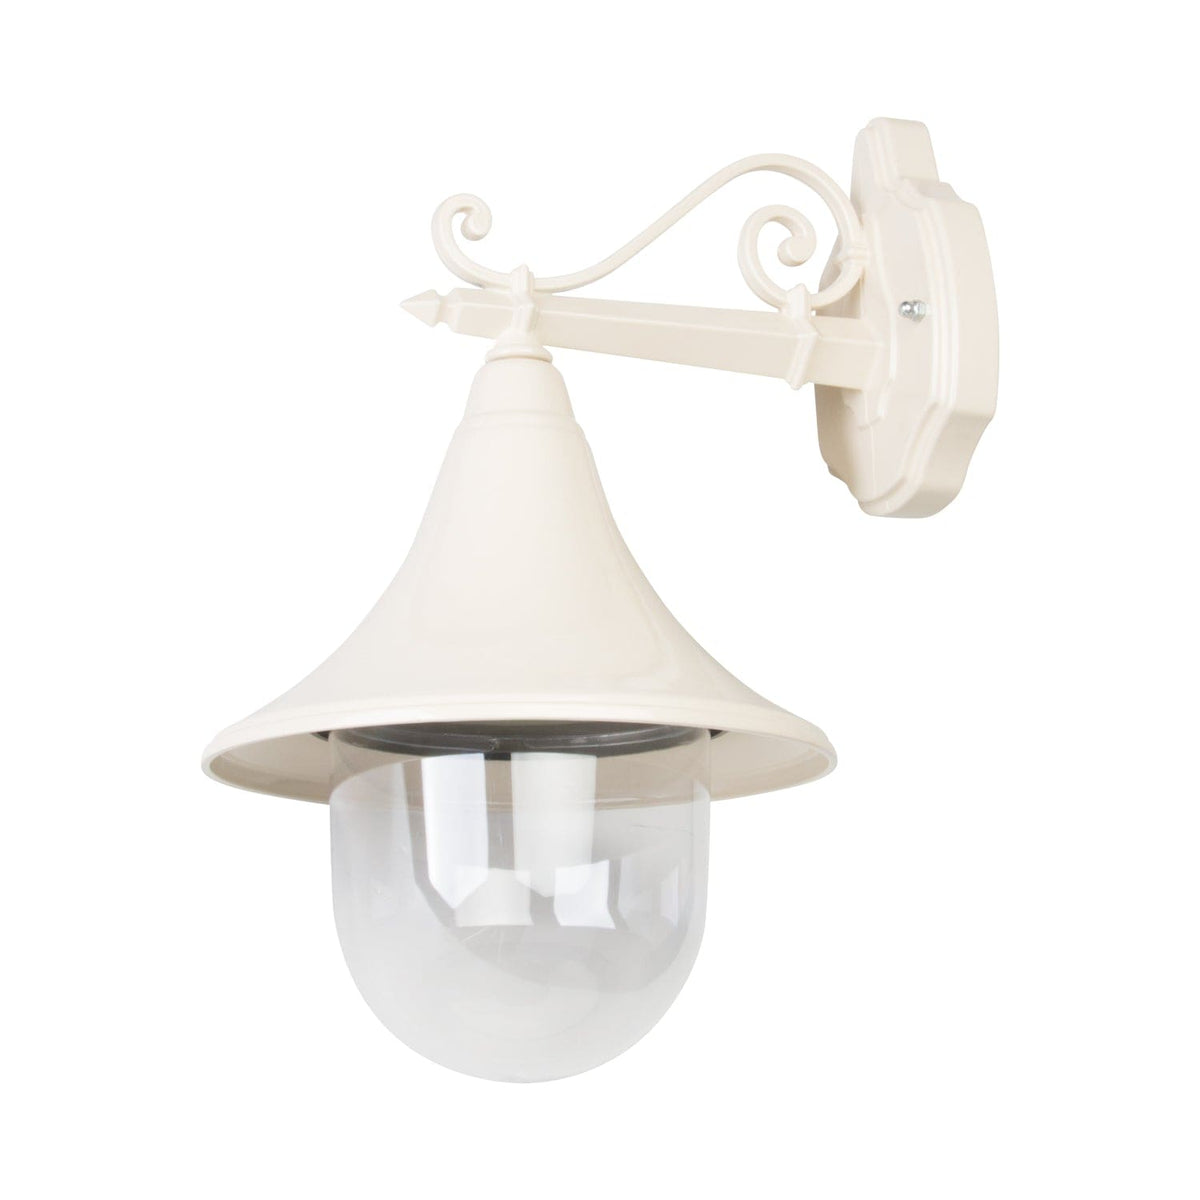 Domus Lighting Outdoor Wall Bracket Beige Domus GT-654 Monaco Straight Arm Wall Light Lights-For-You 15812